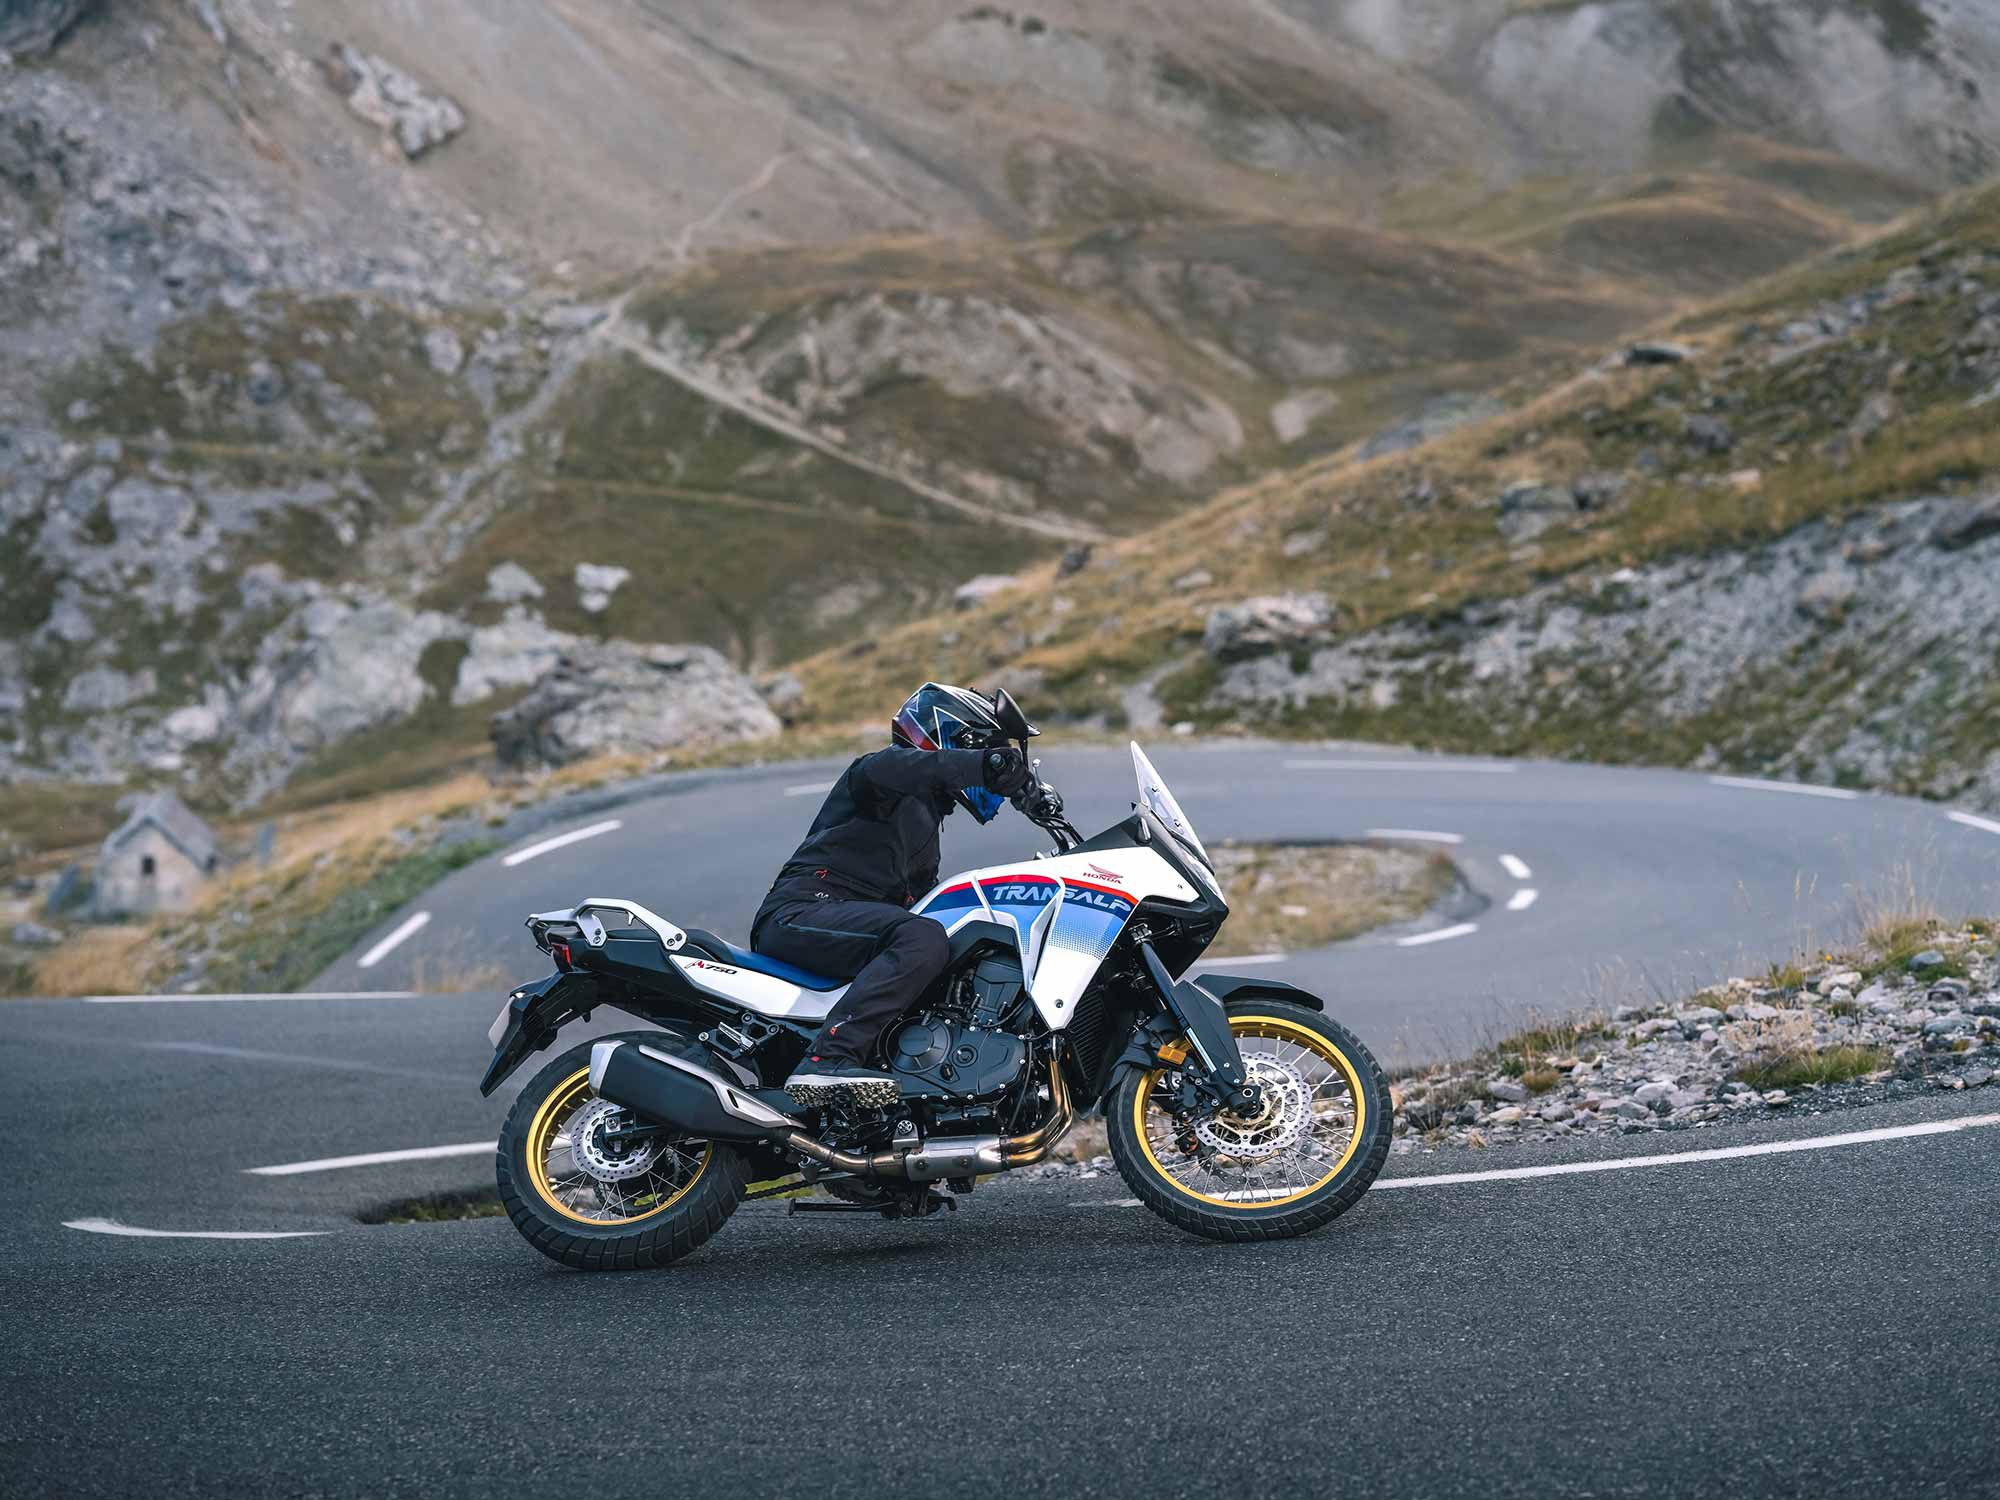 The Transalp will make quick work of mountain roads and switchbacks.